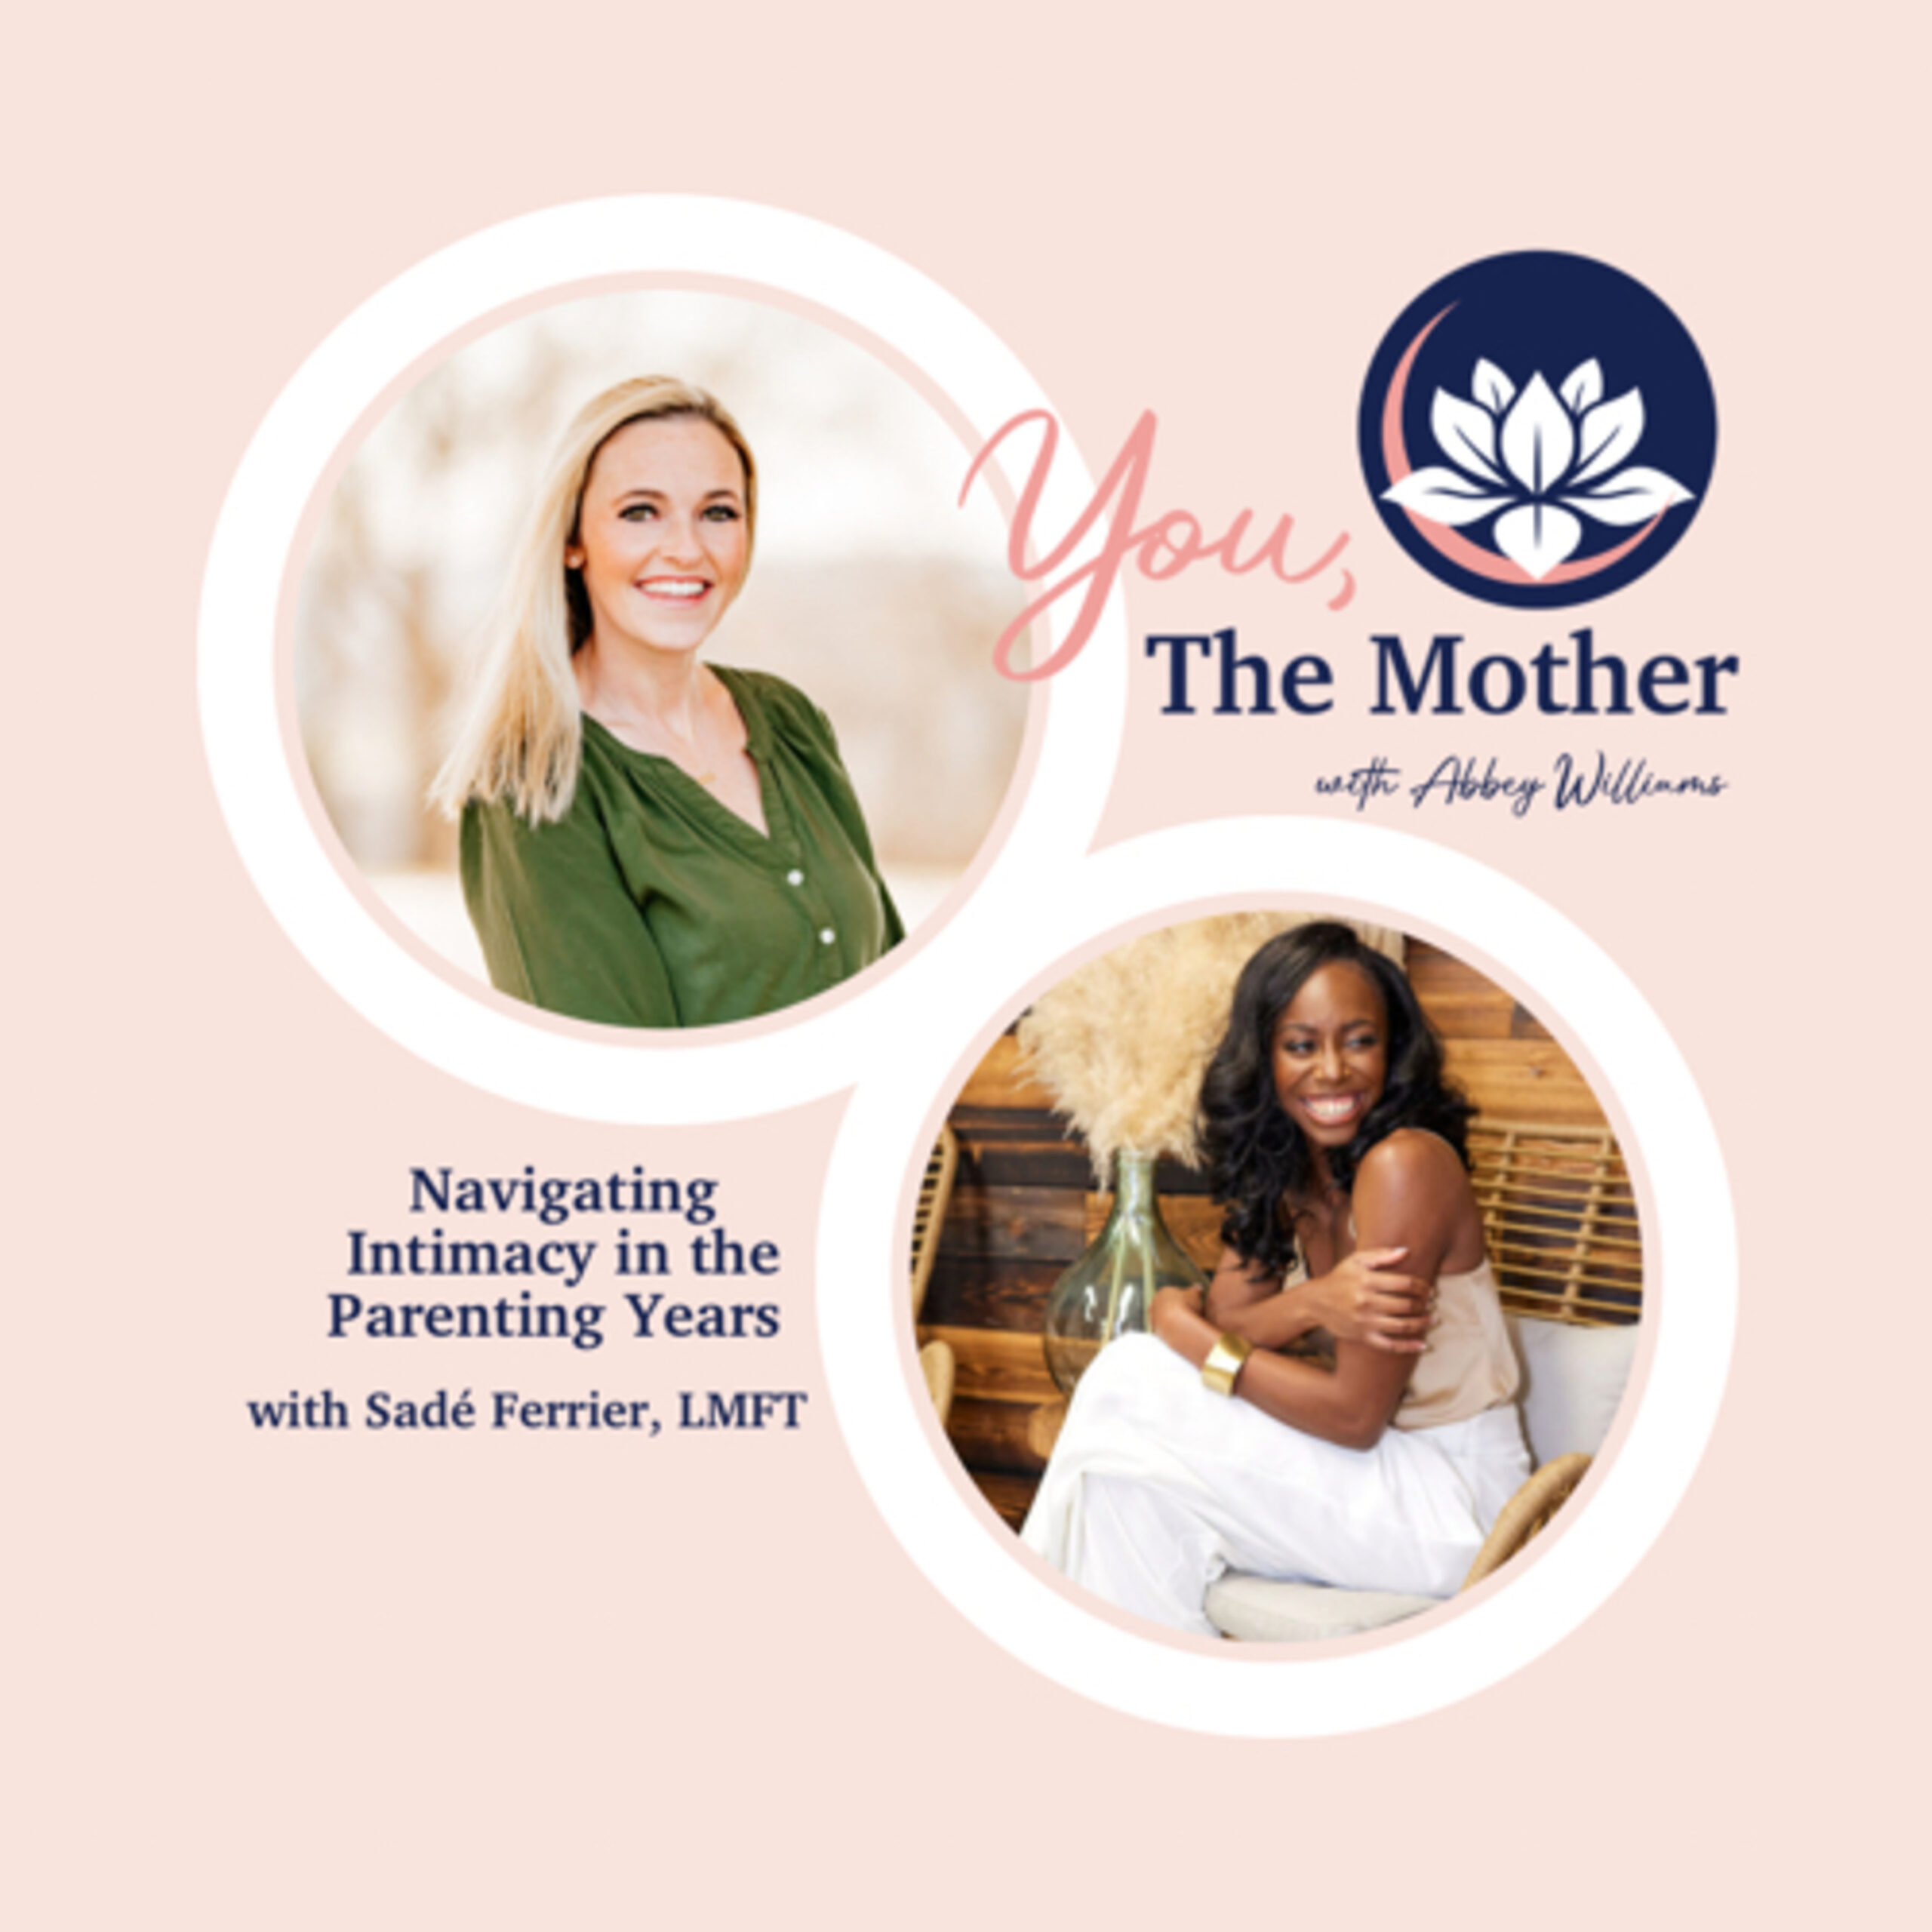 Navigating Intimacy in the Parenting Years with Sadé Ferrier